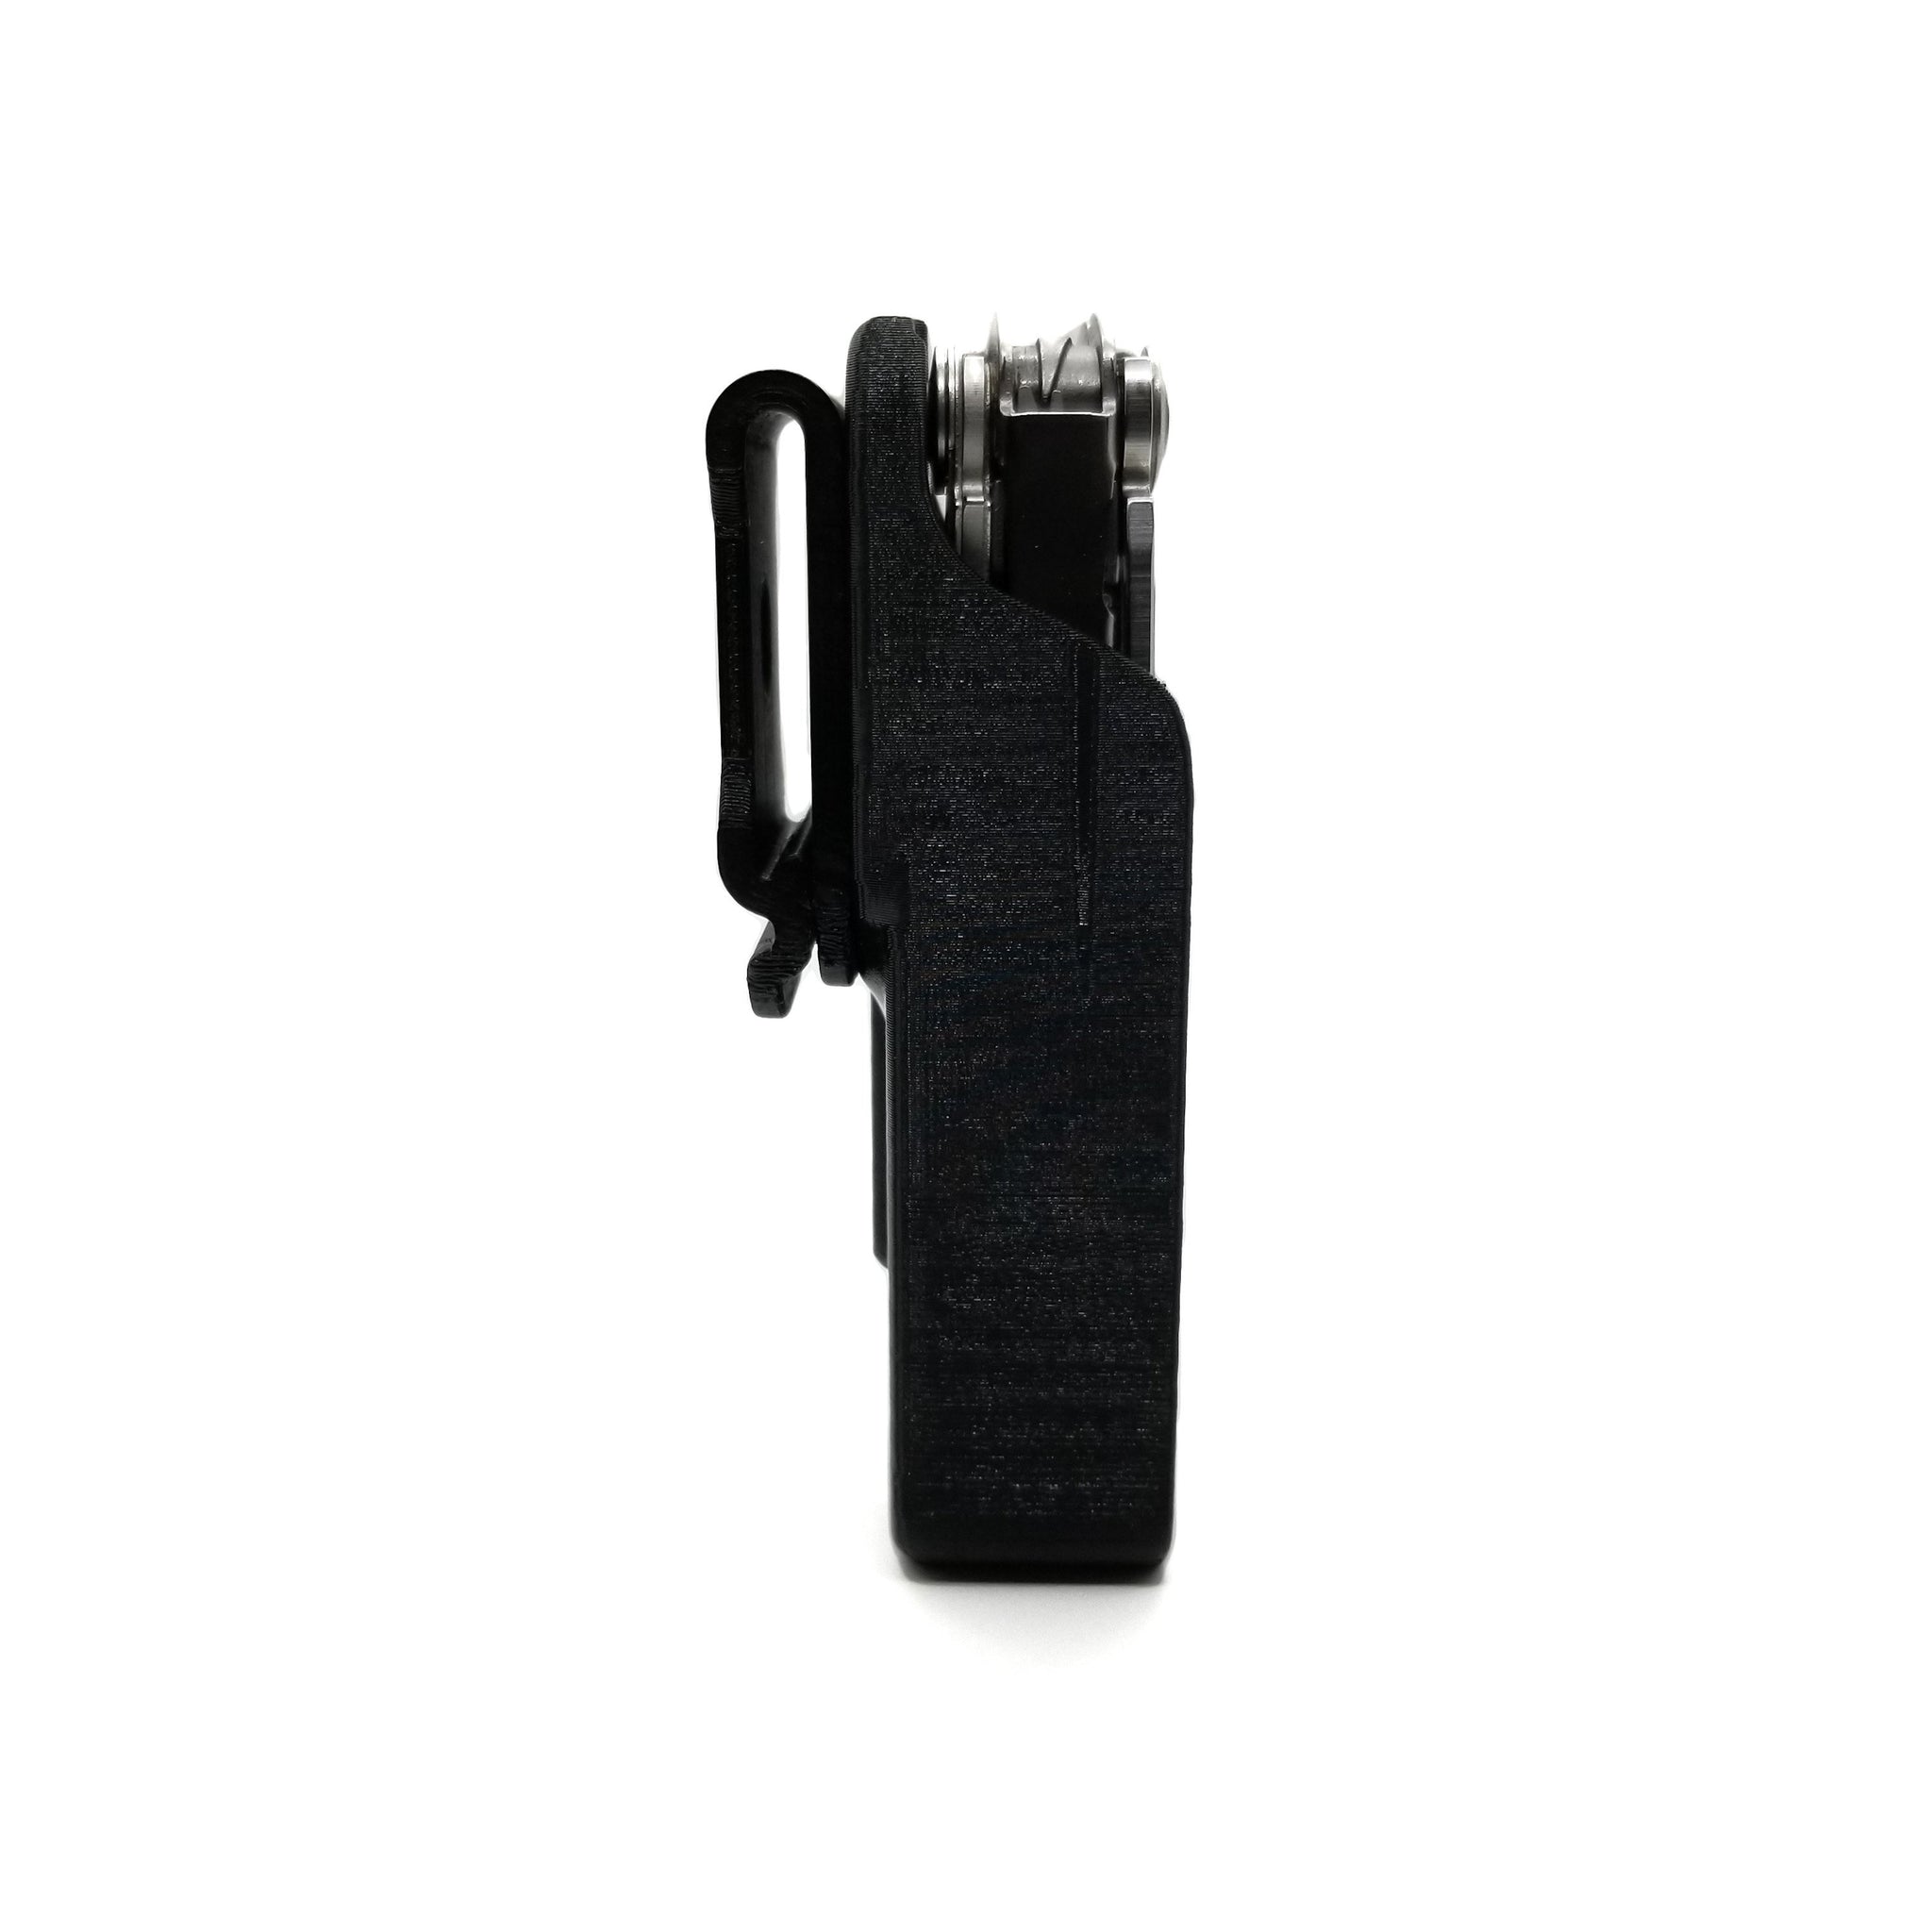 Holster for Leatherman Surge, Closed Loop (3BB54VQXT) by ZapWizard